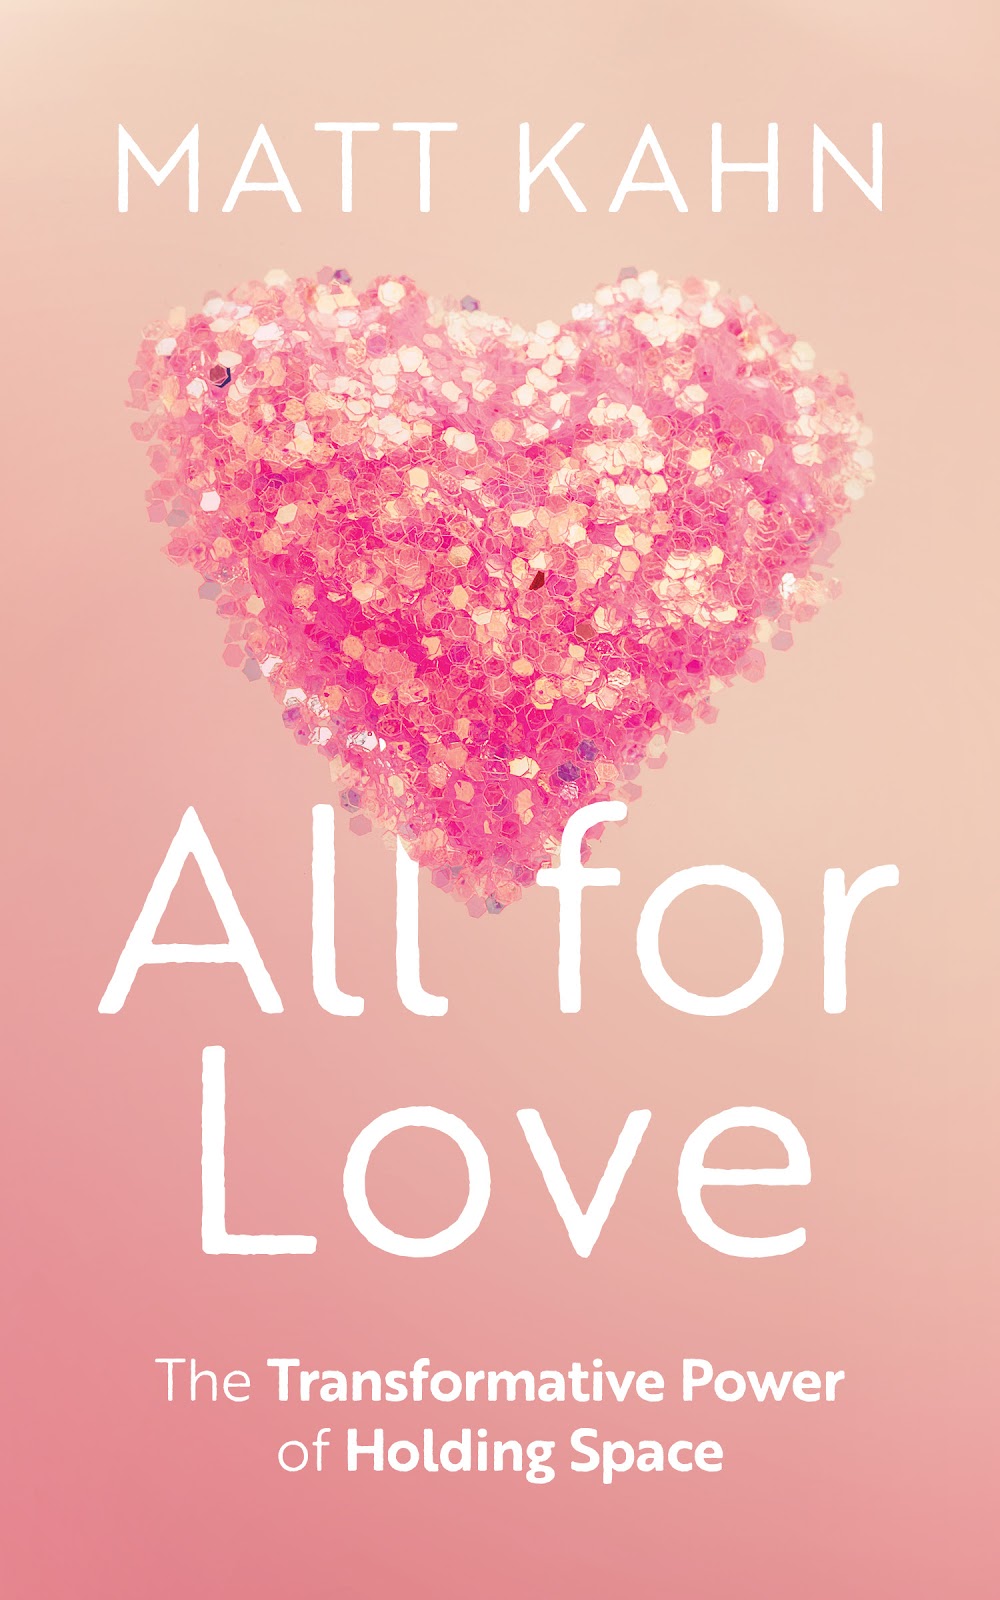 All for Love, Tuesday, May 17, 2022, Press release picture